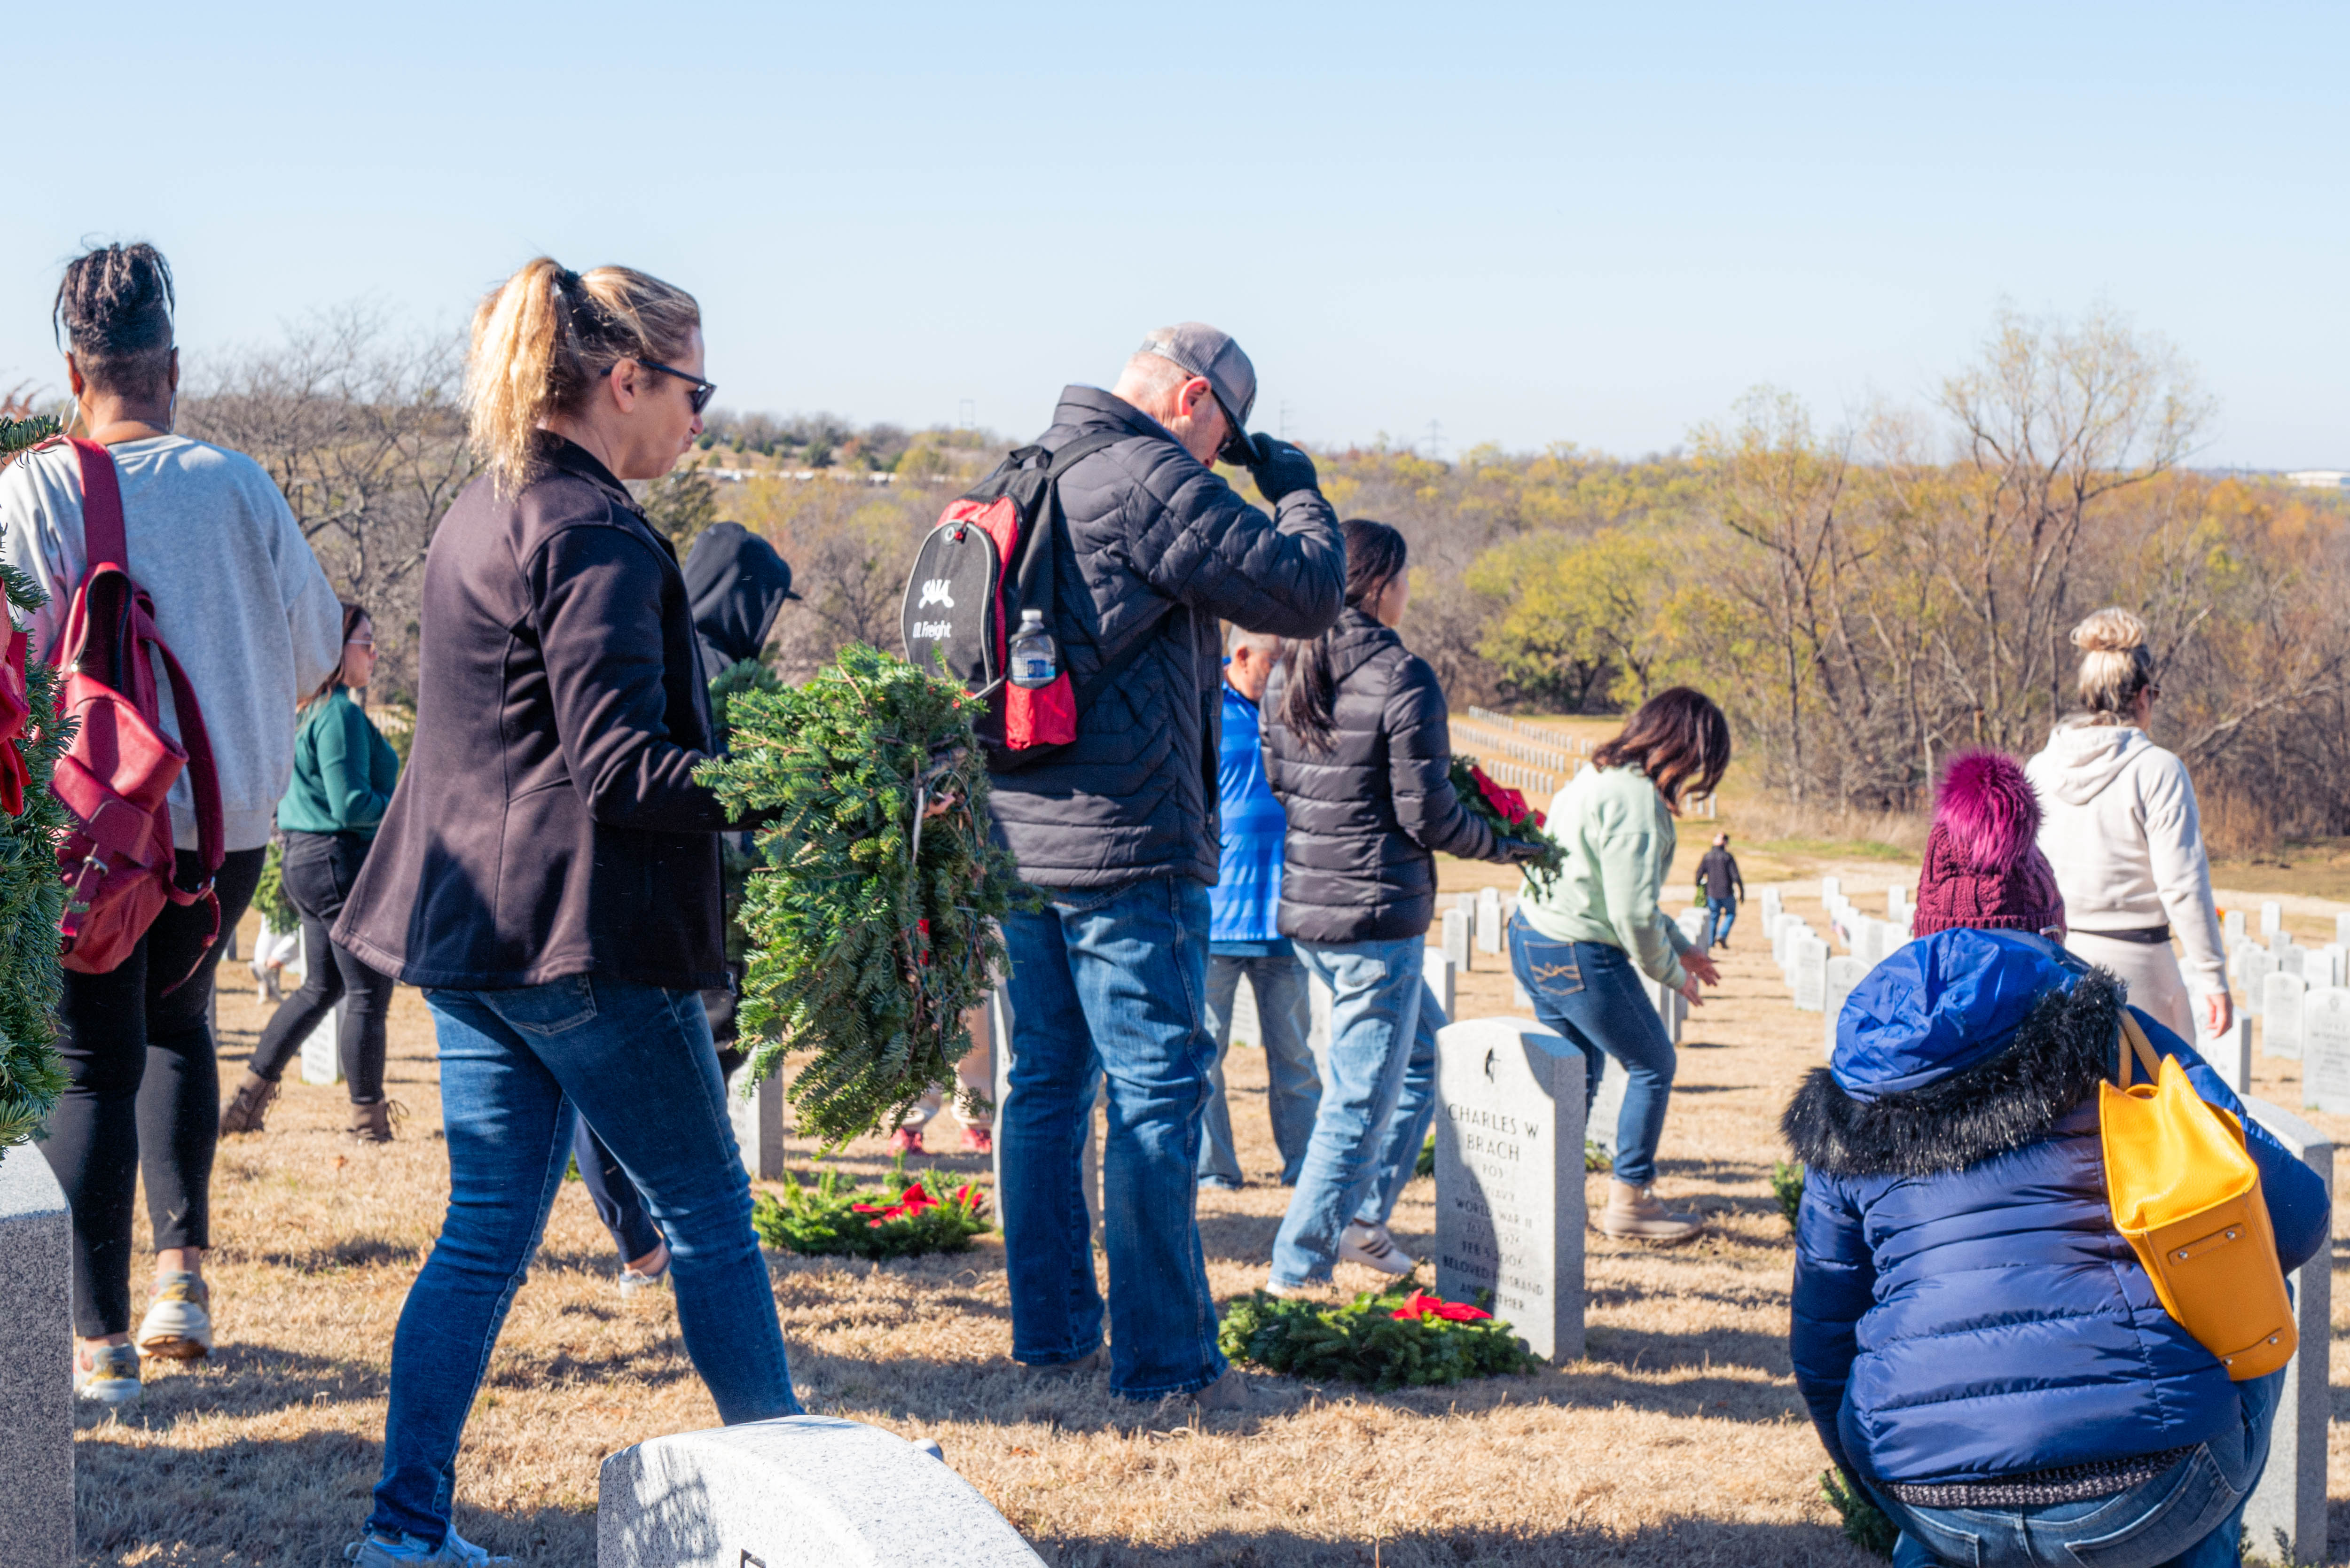 A local community member of the Dallas-Forth Worth area pays respects to a fallen veteran during the 2023 National Wreaths Acros America Day.